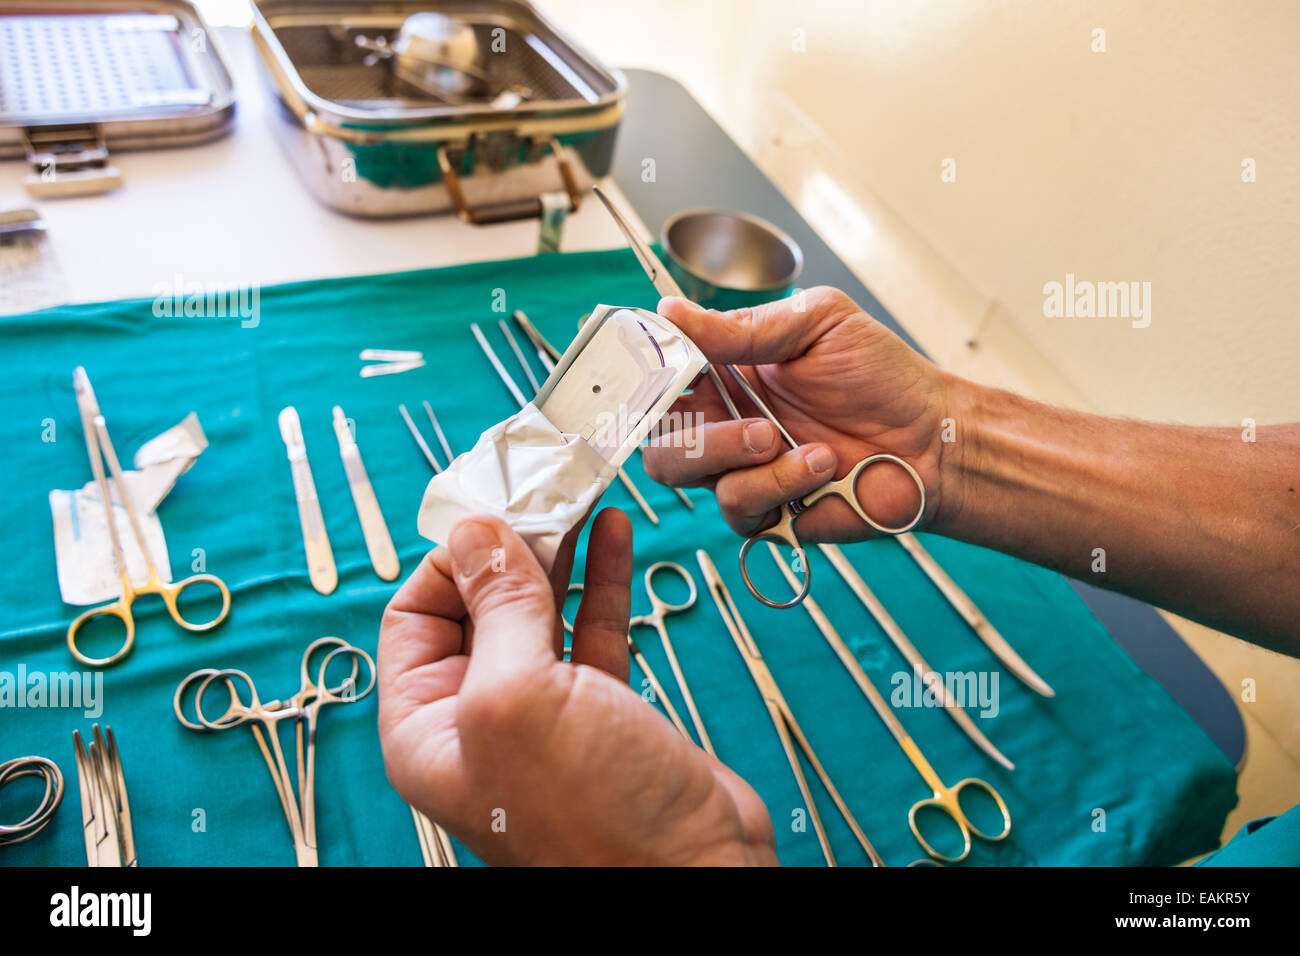 the hands of a surgeon preparing the thread for the stitches Stock Photo